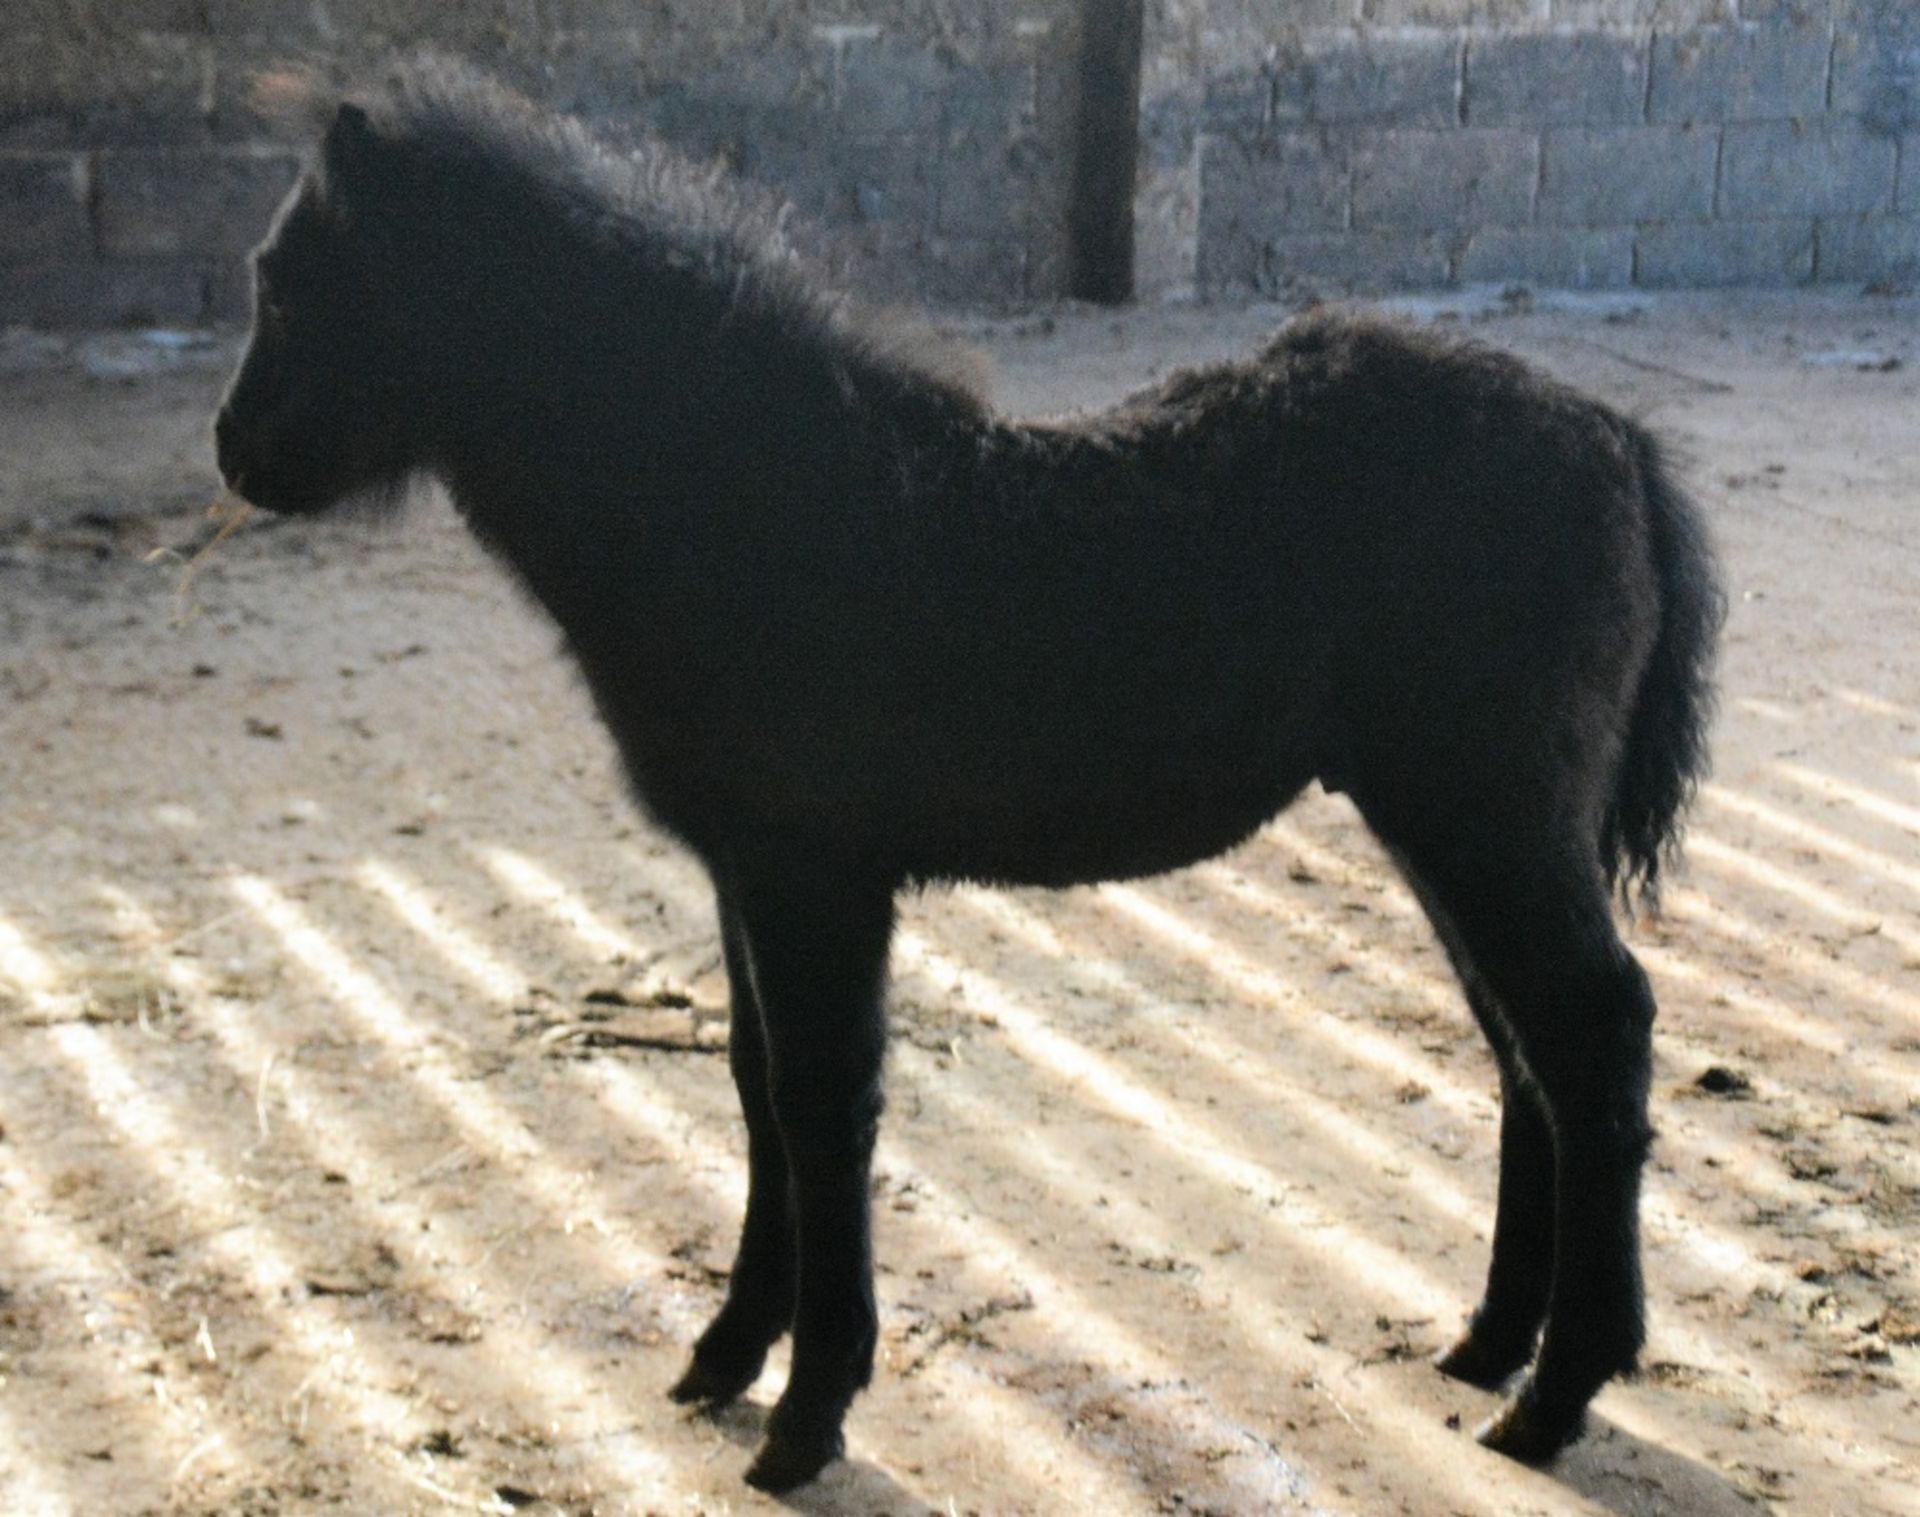 'BLACKATOR KIP' DARTMOOR HILL PONY GREY COLT APPROX 6 MONTHS OLD - Image 4 of 4